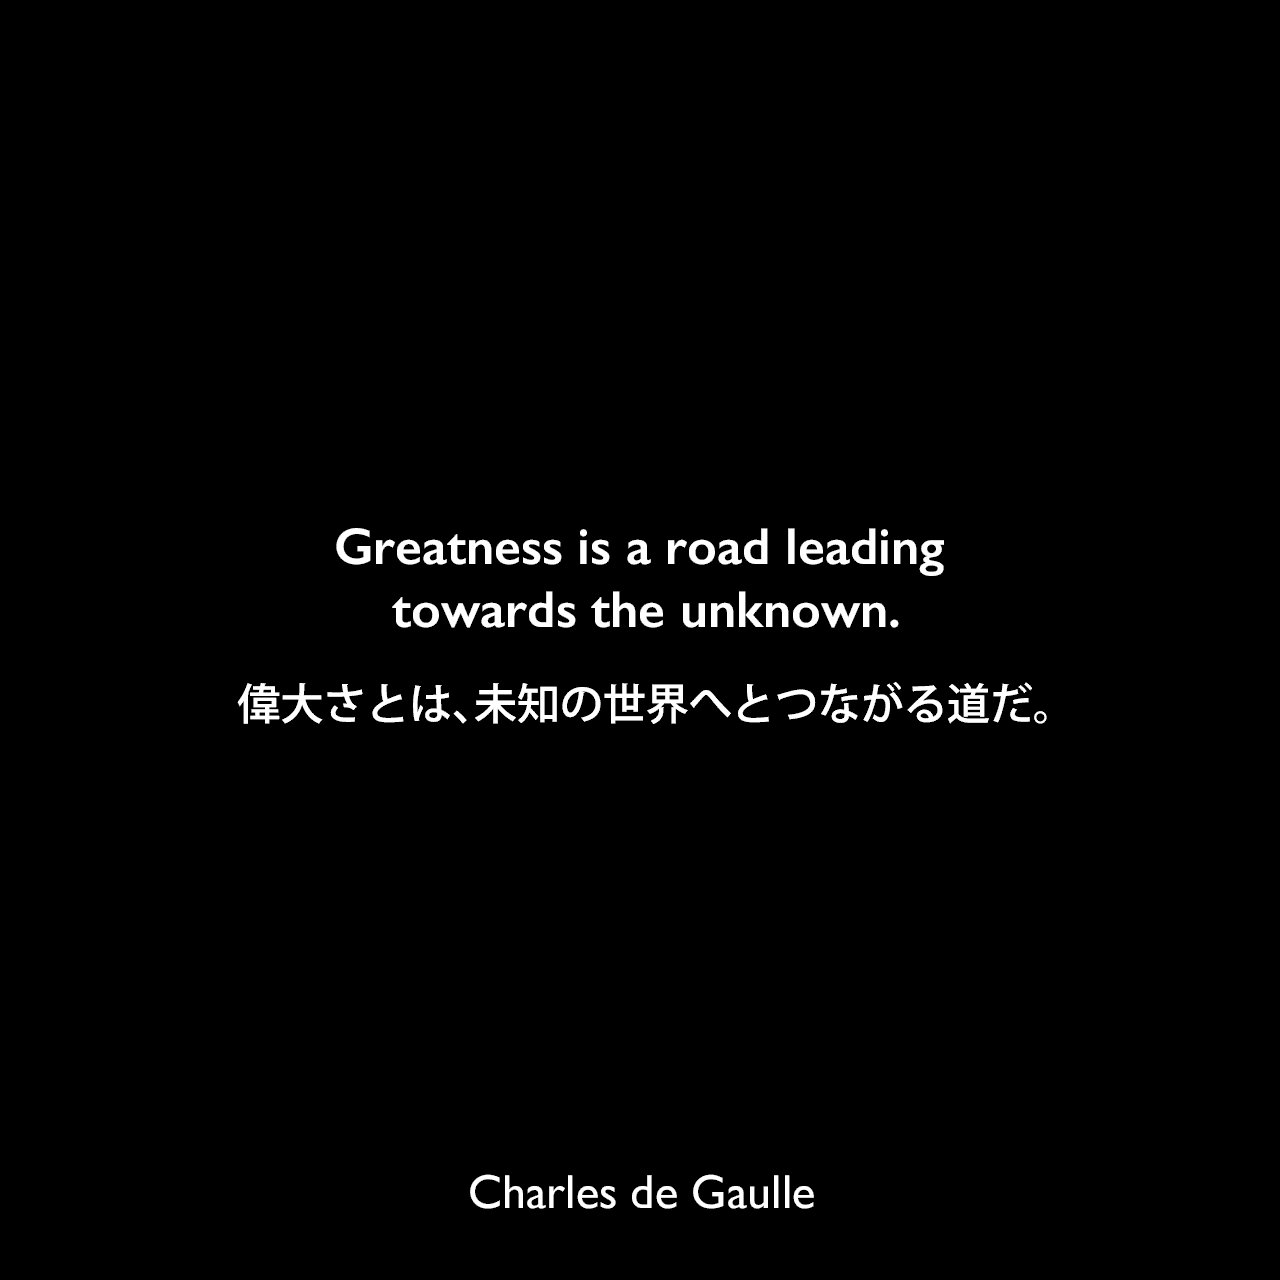 Greatness is a road leading towards the unknown.偉大さとは、未知の世界へとつながる道だ。Charles de Gaulle